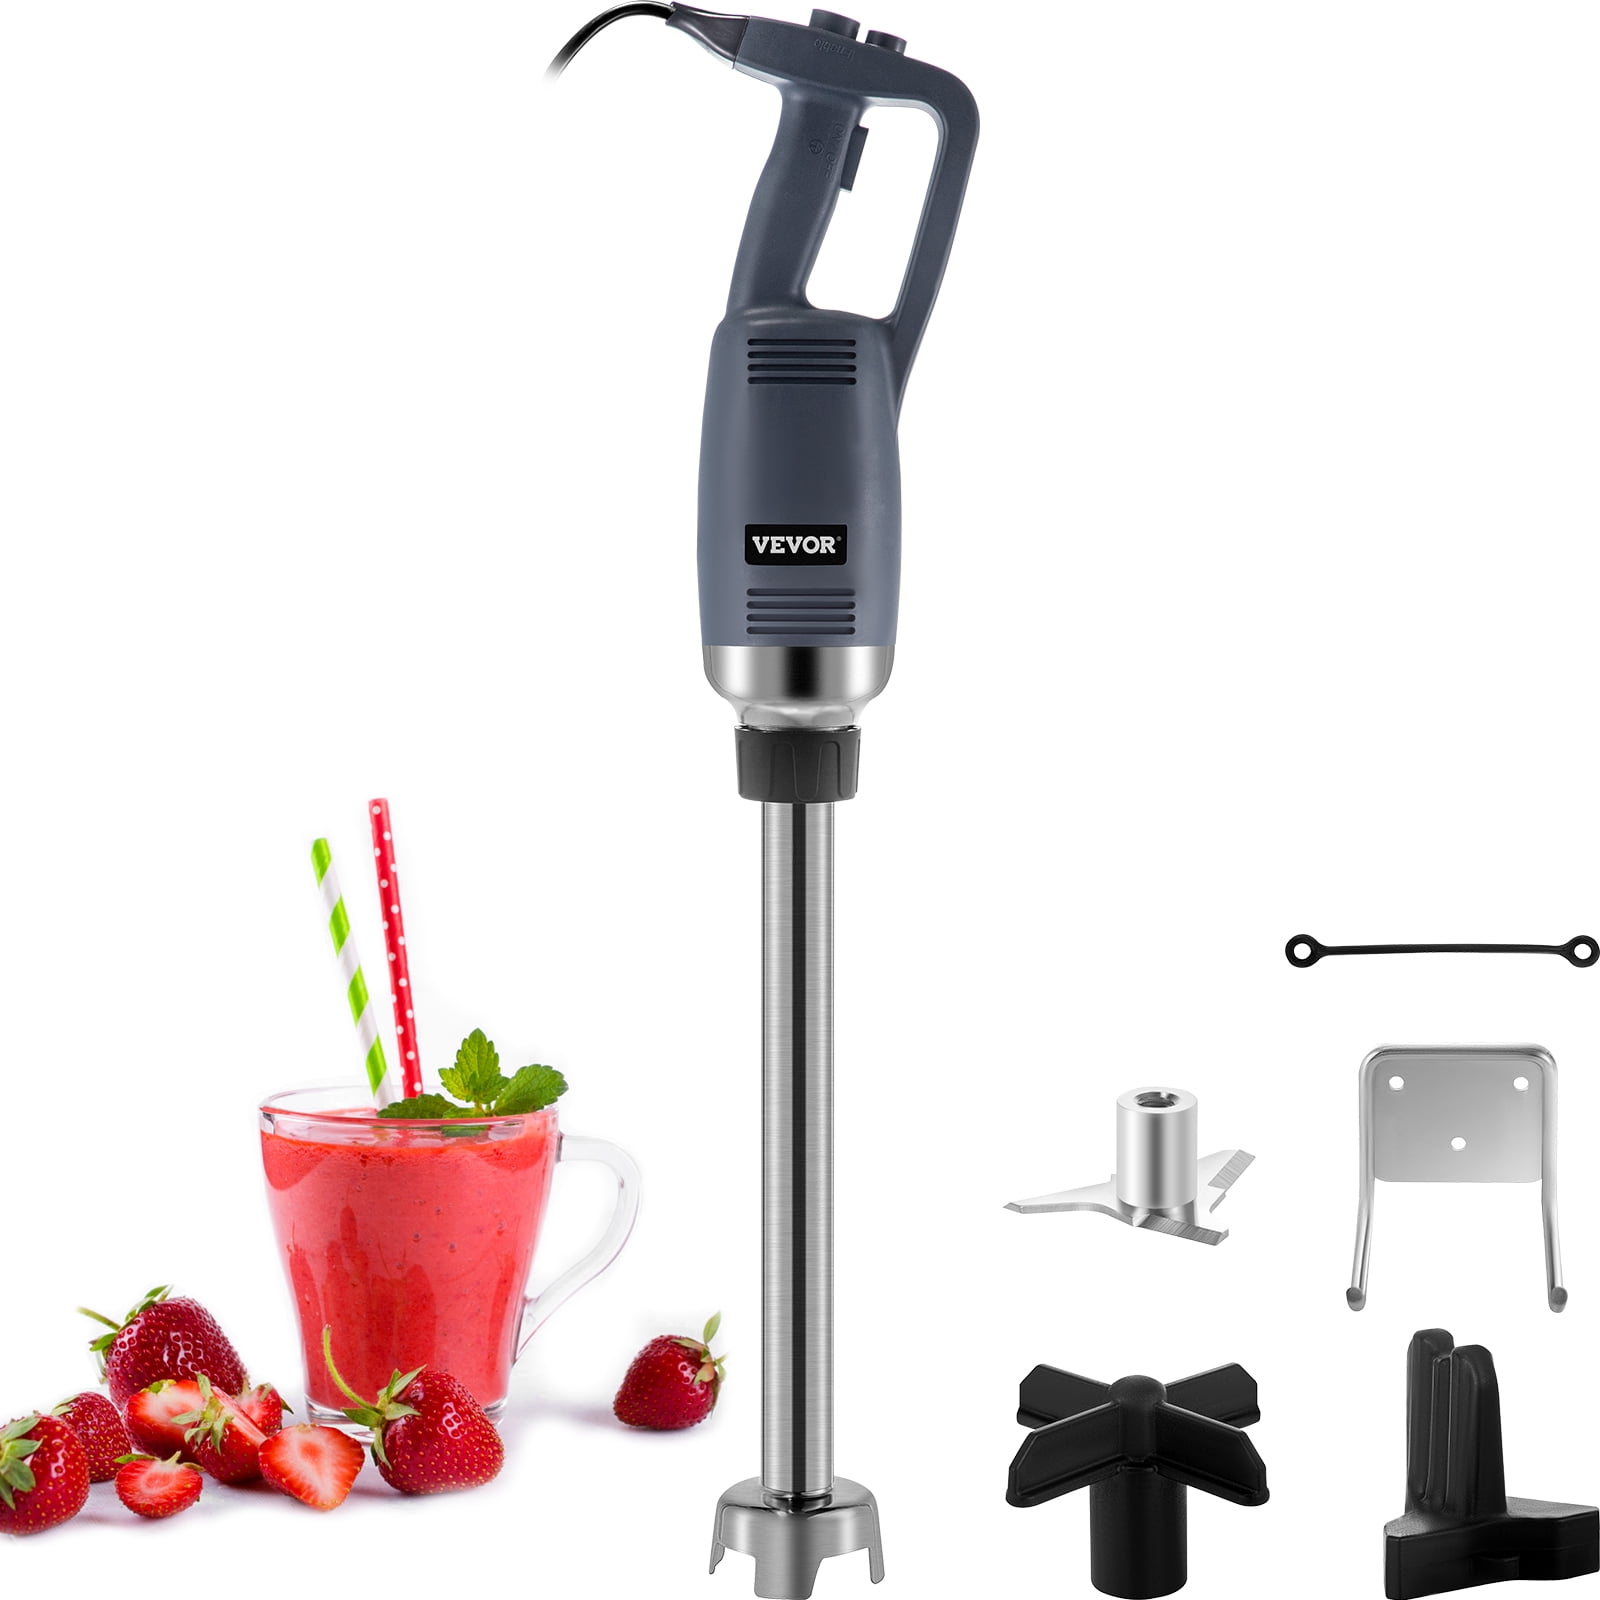 Hand Mixer vs Immersion Blender: What's the Difference?